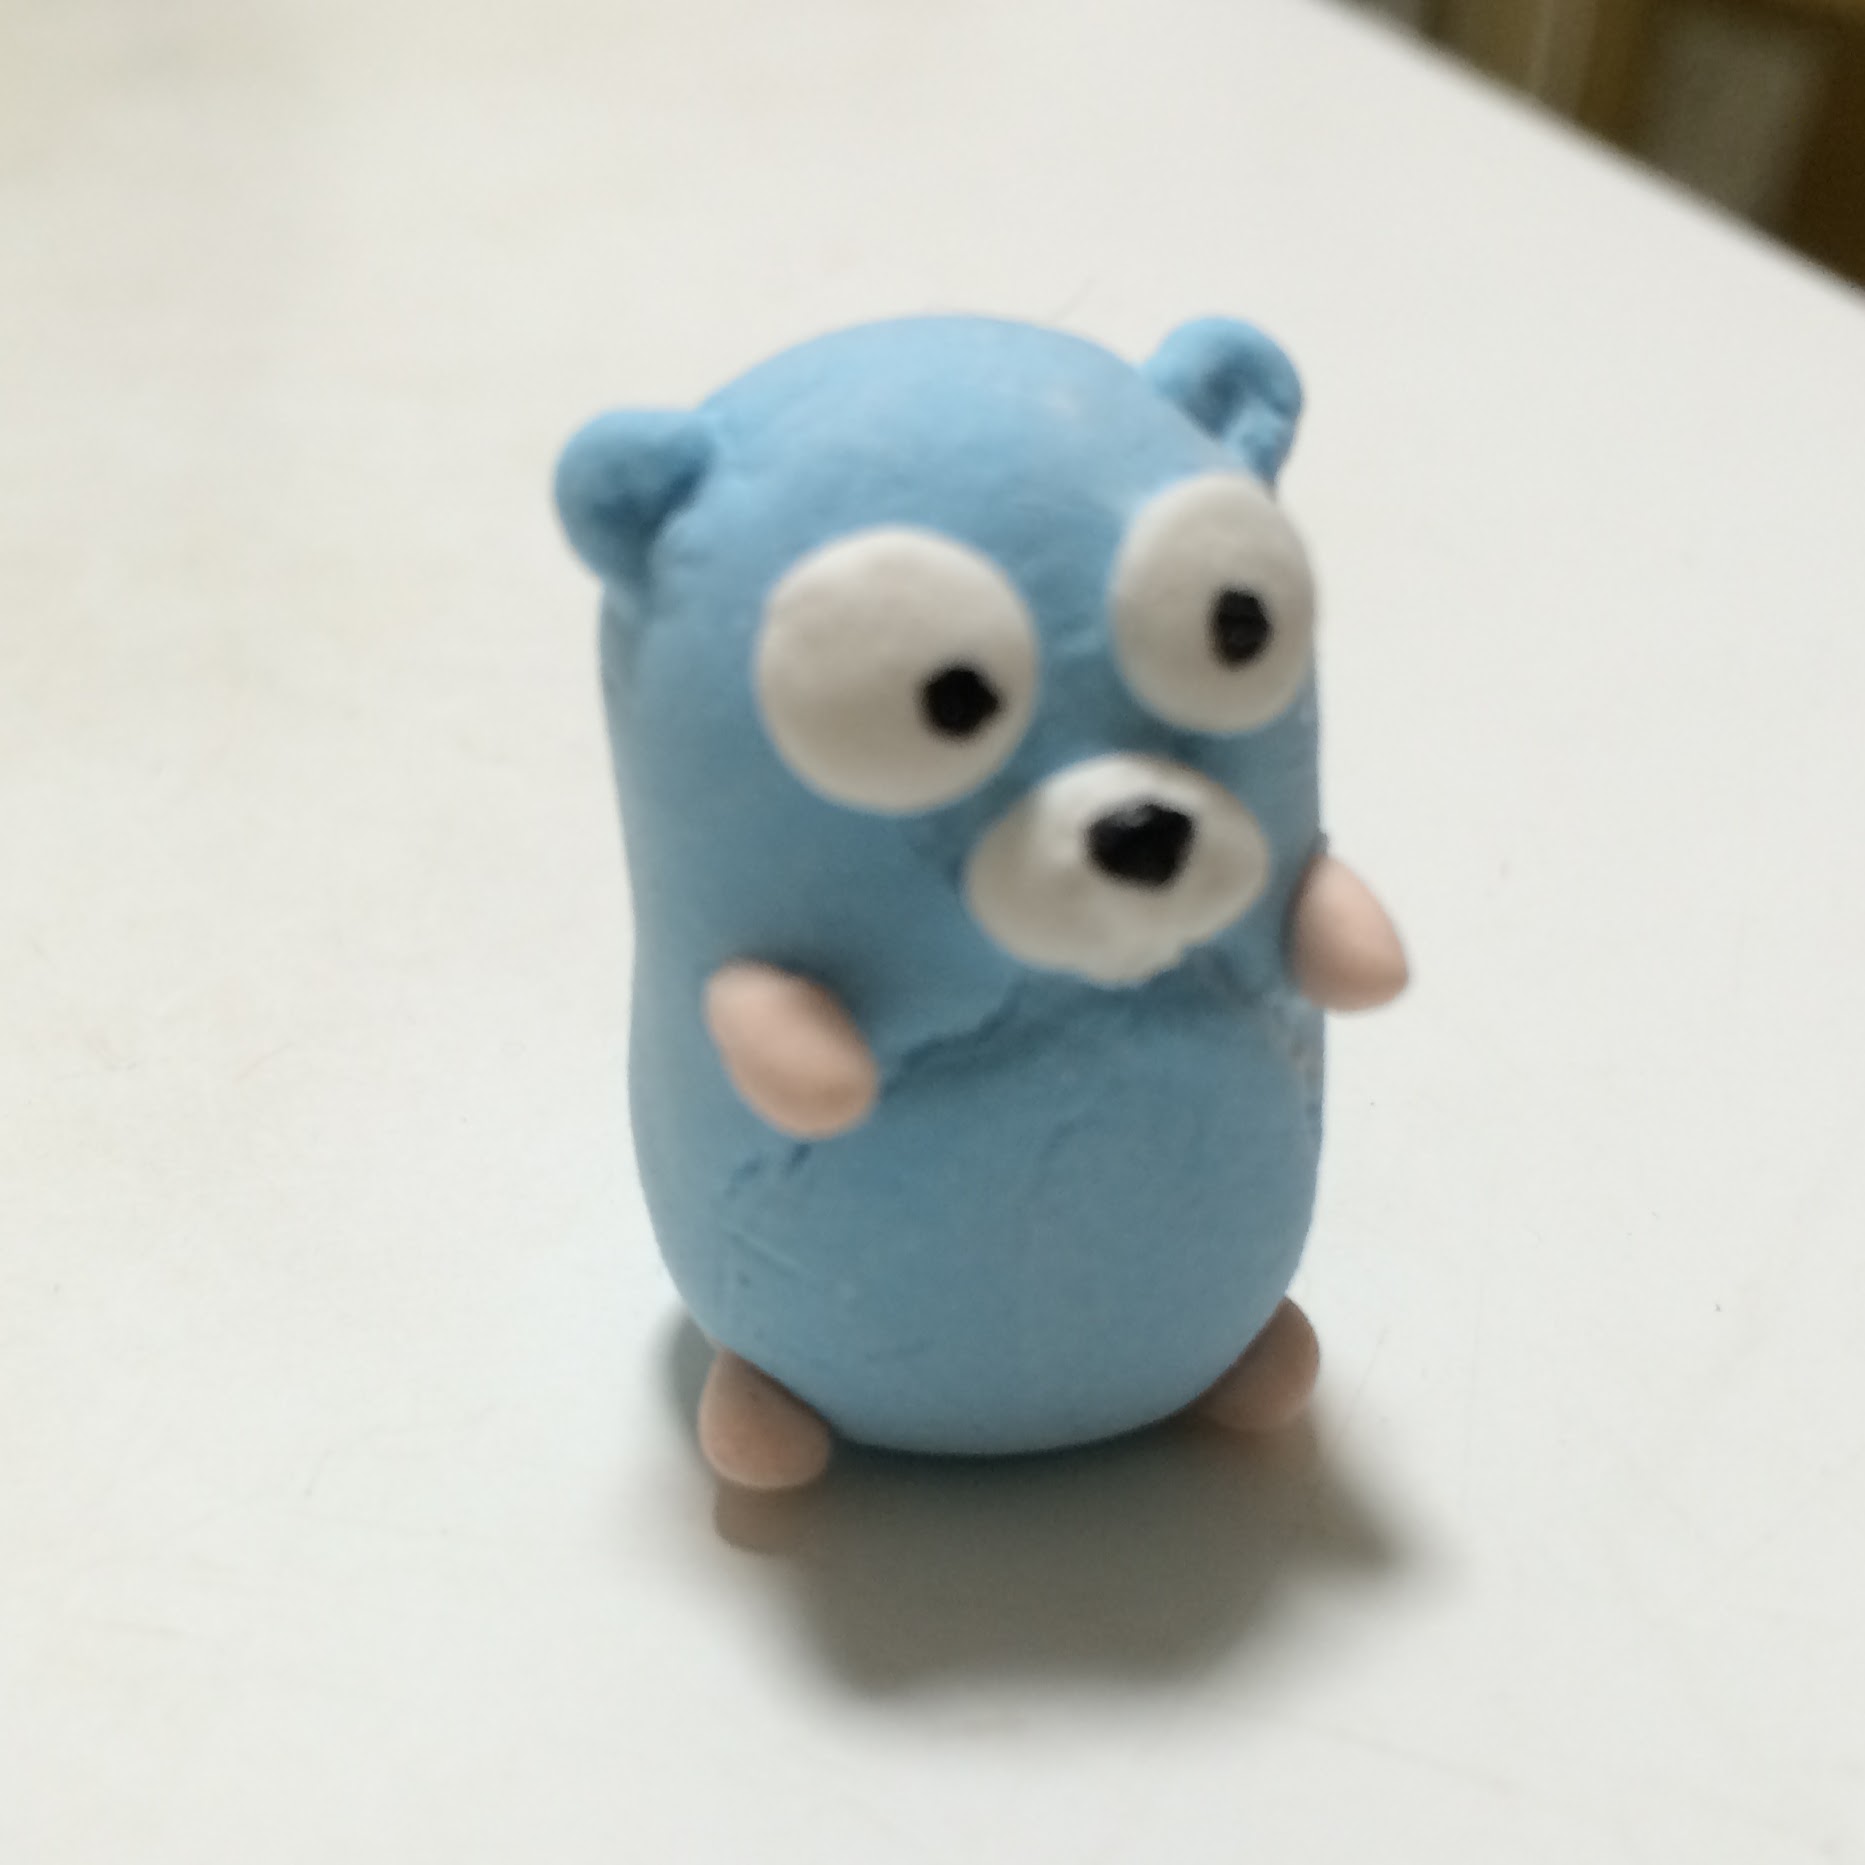 My wife made me the Go Gopher with cray as a Christmas gift. So cute!

妻がクリスマスプレゼントの1つに、粘土でゴーファー君を作ってくれた。可愛すぎる。
もっとも、僕も妻も #golang 使ってないのだけれど…… (^^